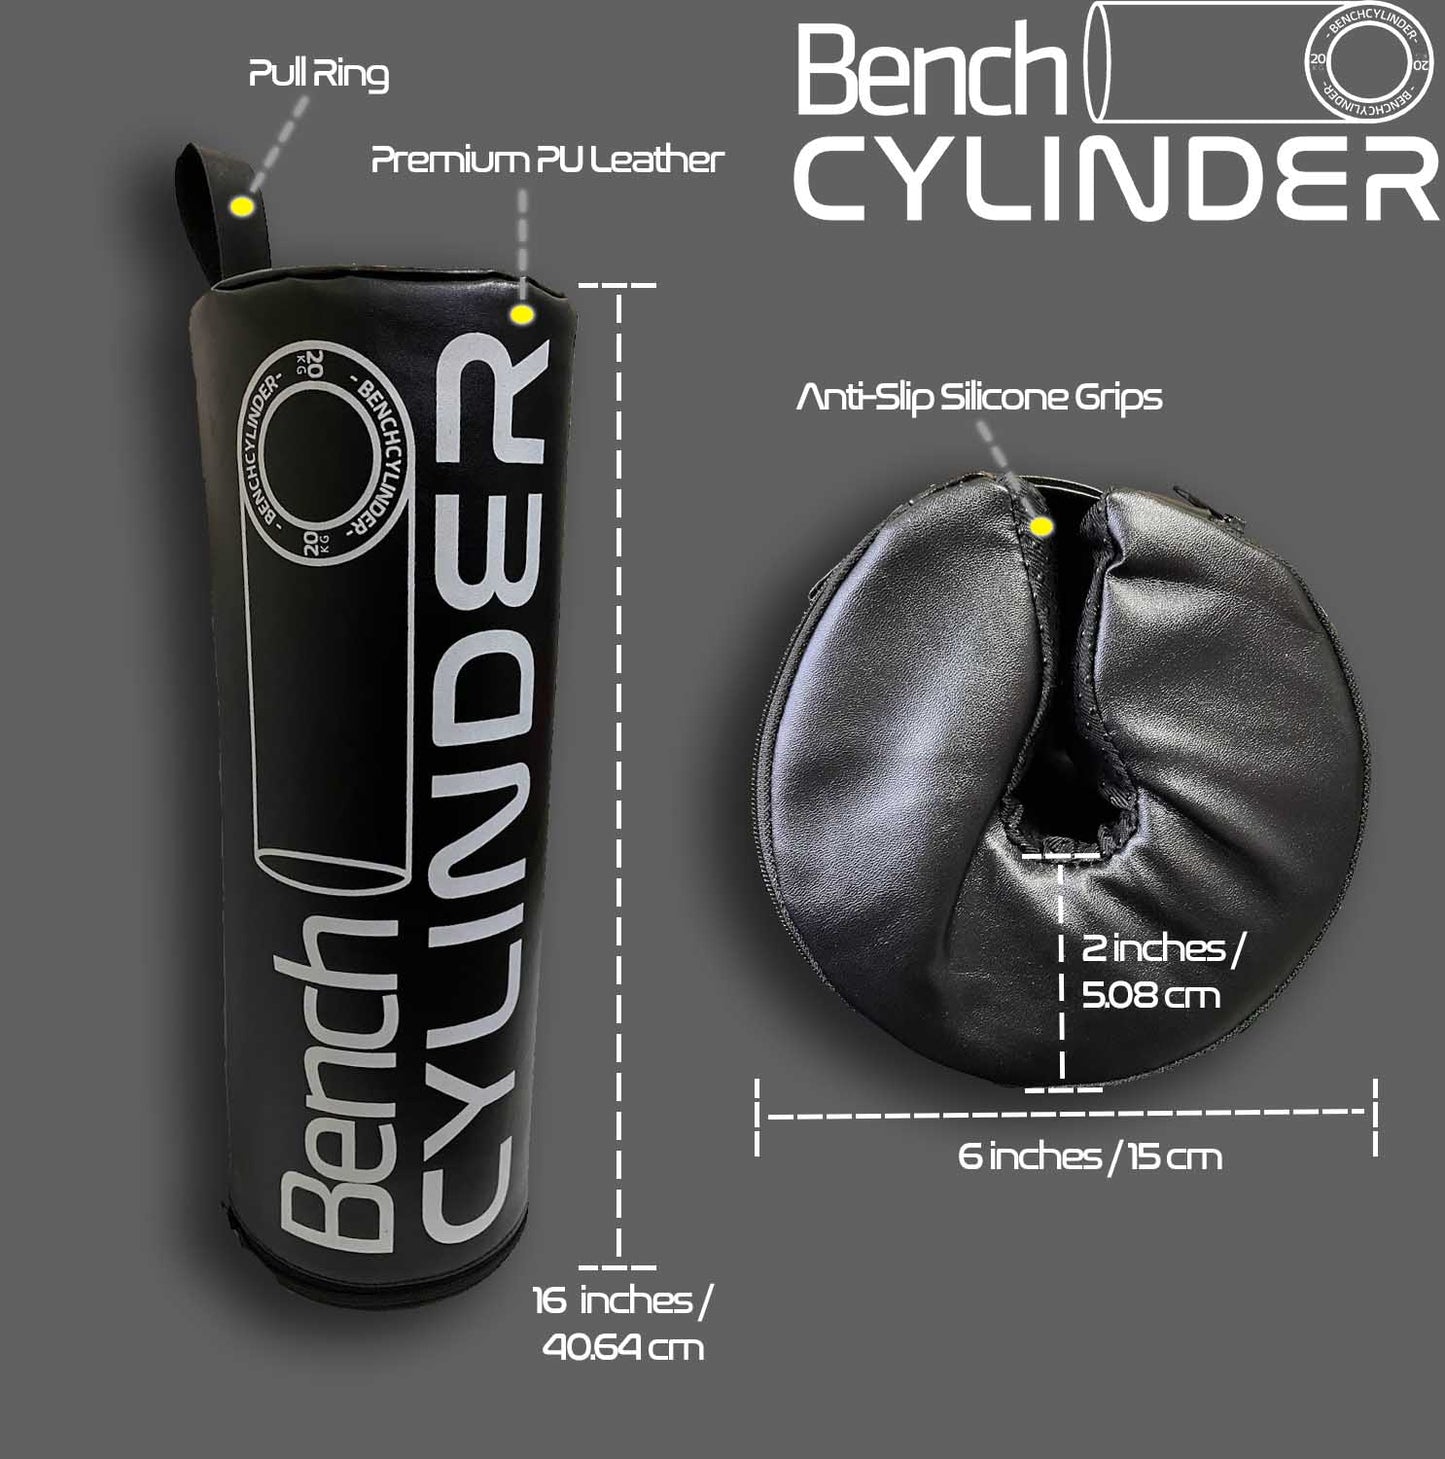 Bench Cylinder Dimensions